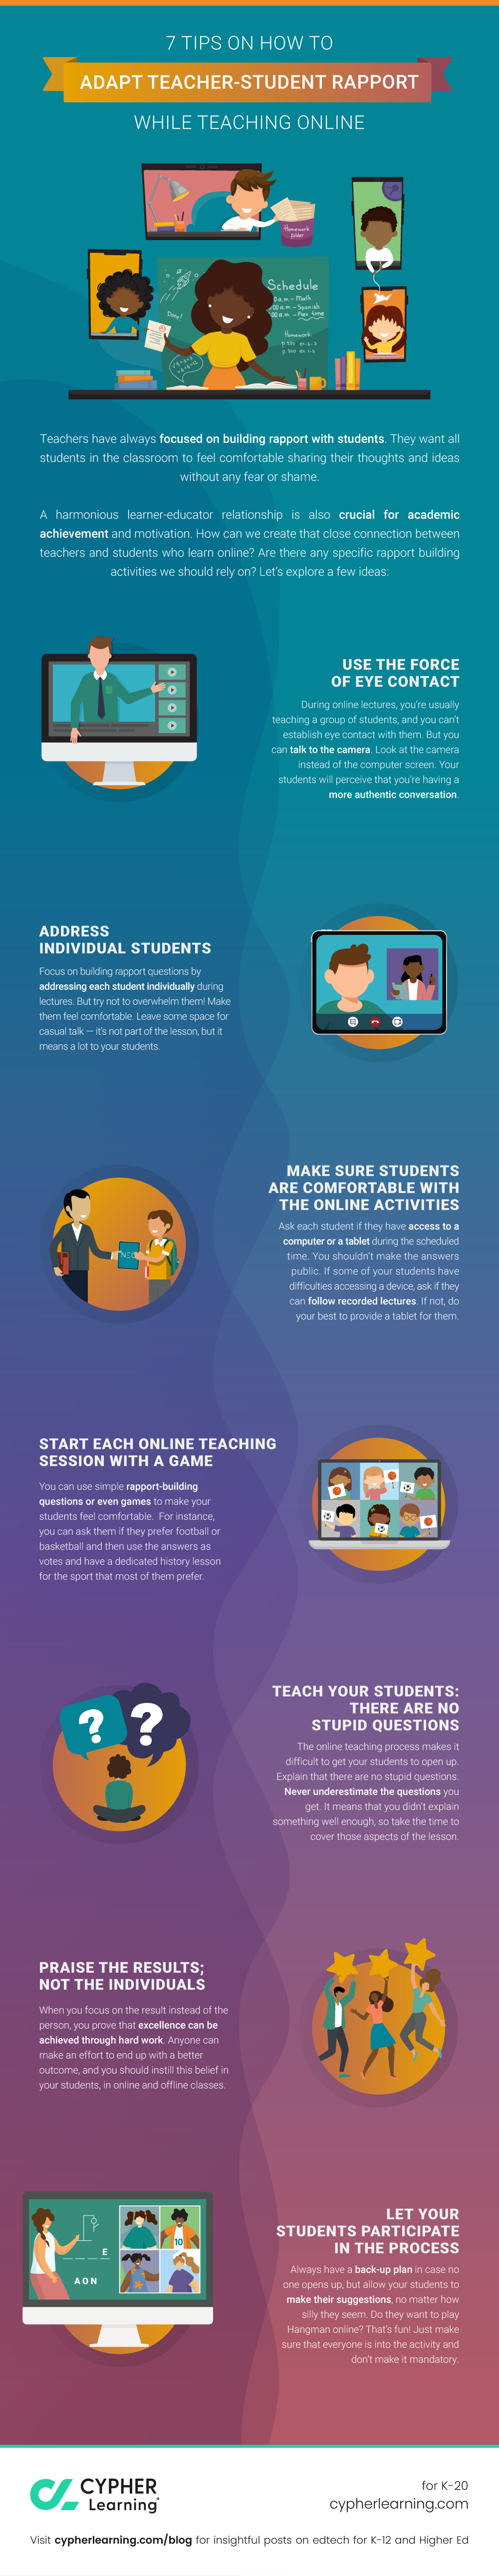 7 Tips on how to adapt teacher-student rapport while teaching online